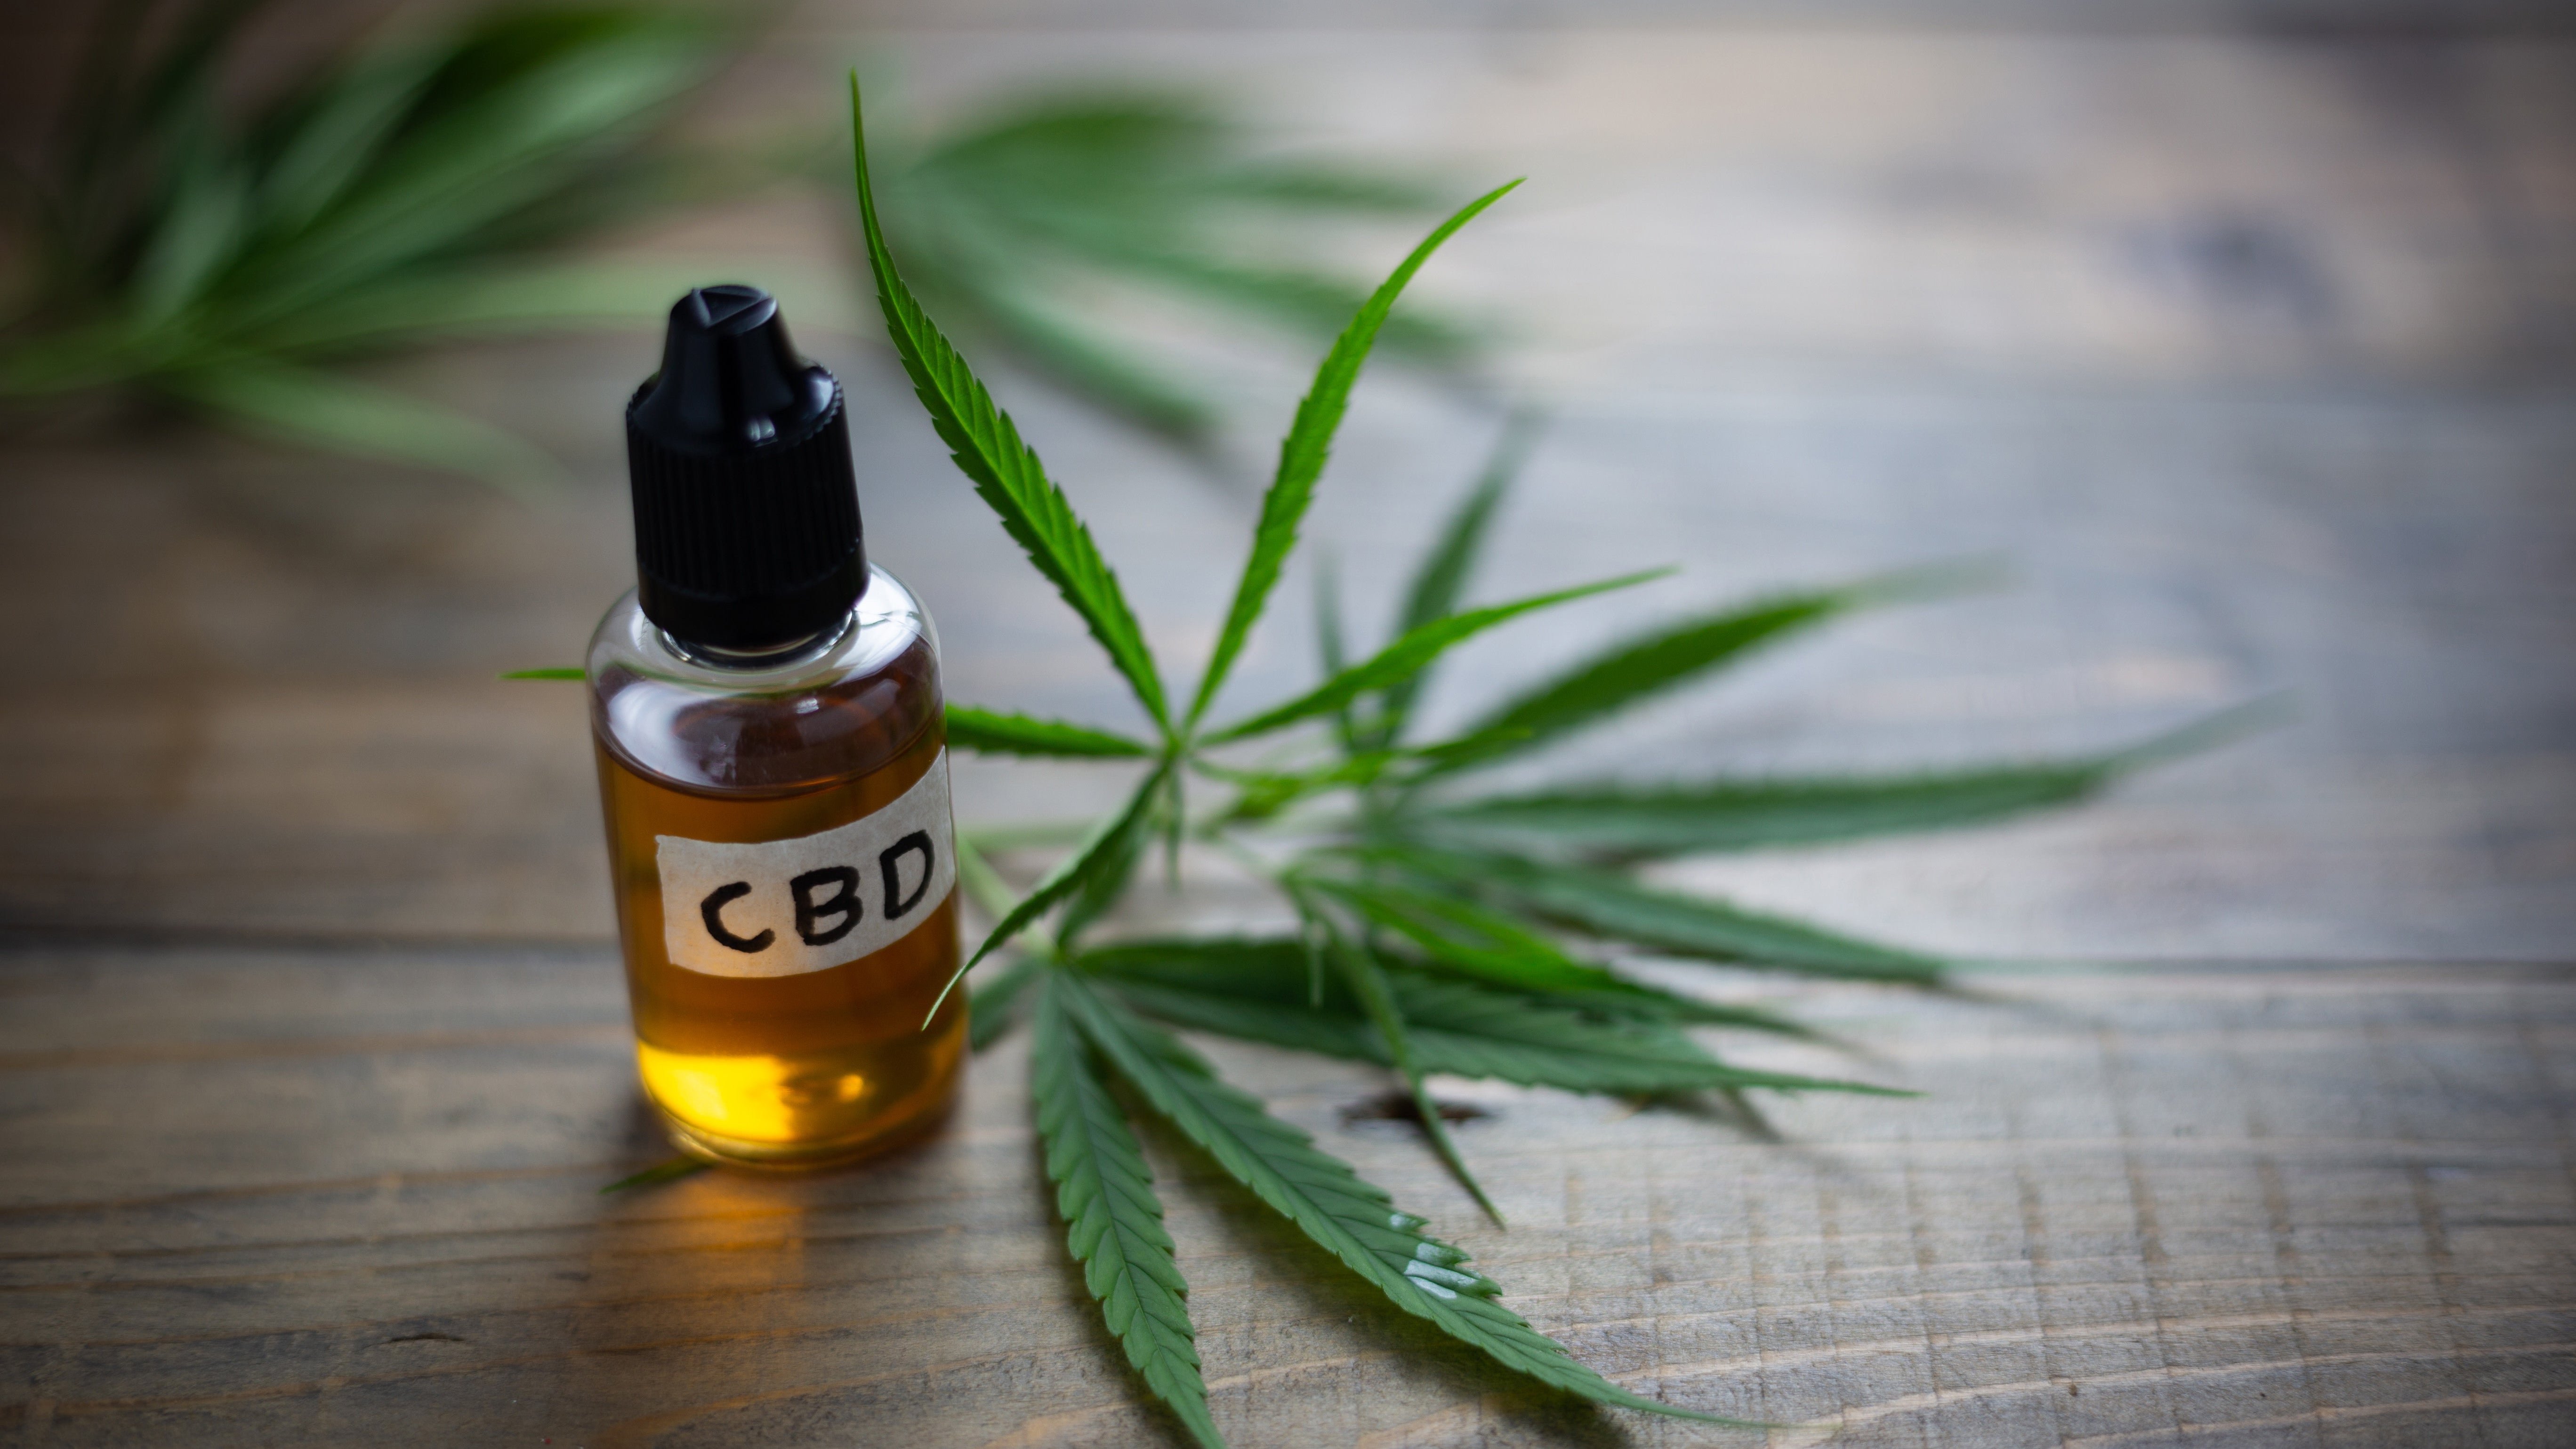 Why The FDA Is Cracking Down On CBD